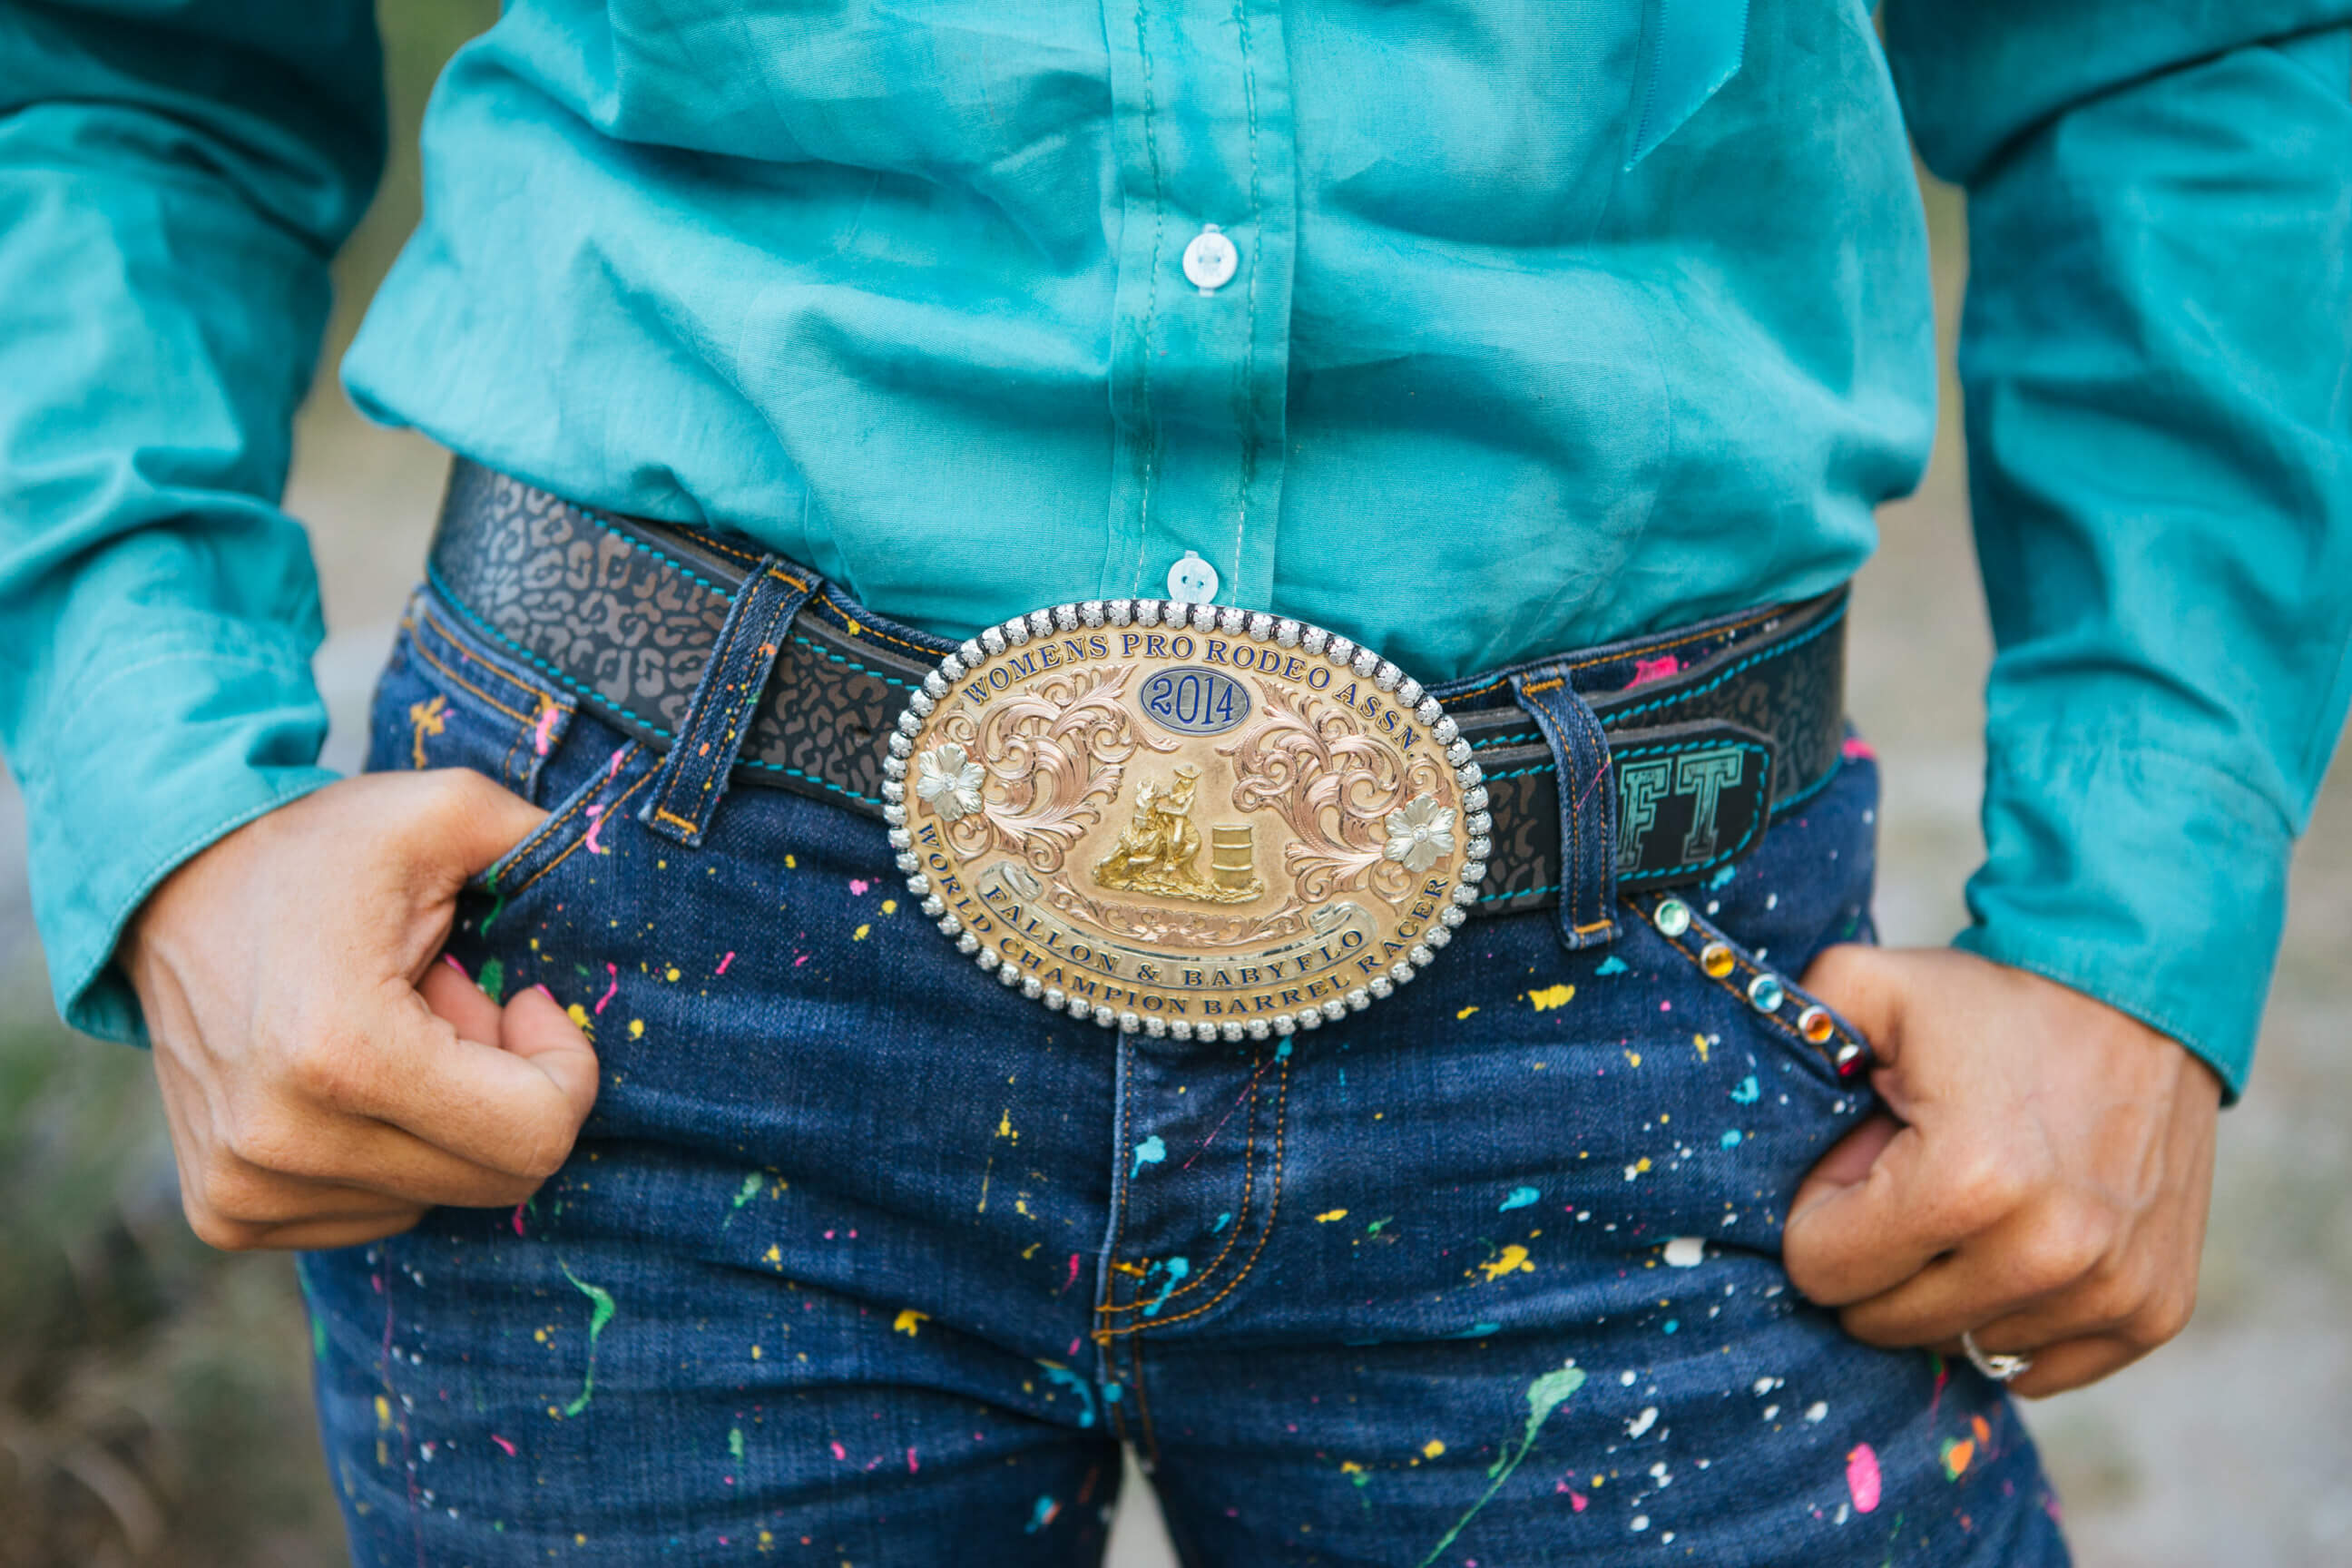 Fallon Taylor sports a large belt buckle and paint spattered pants from her clothing line